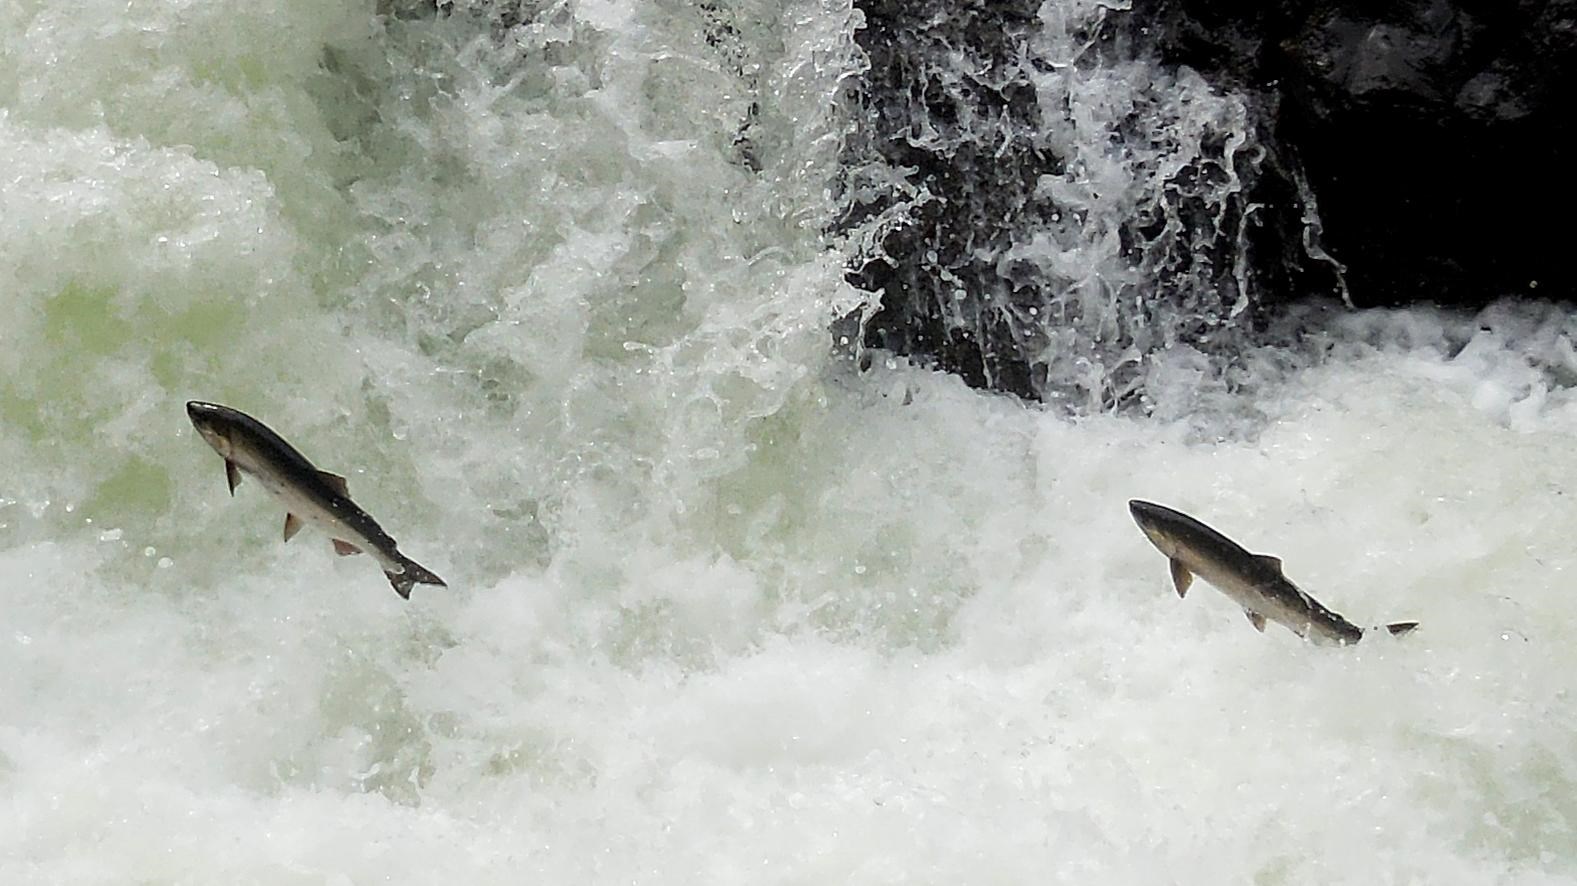 Two salmon leaping in cascading water